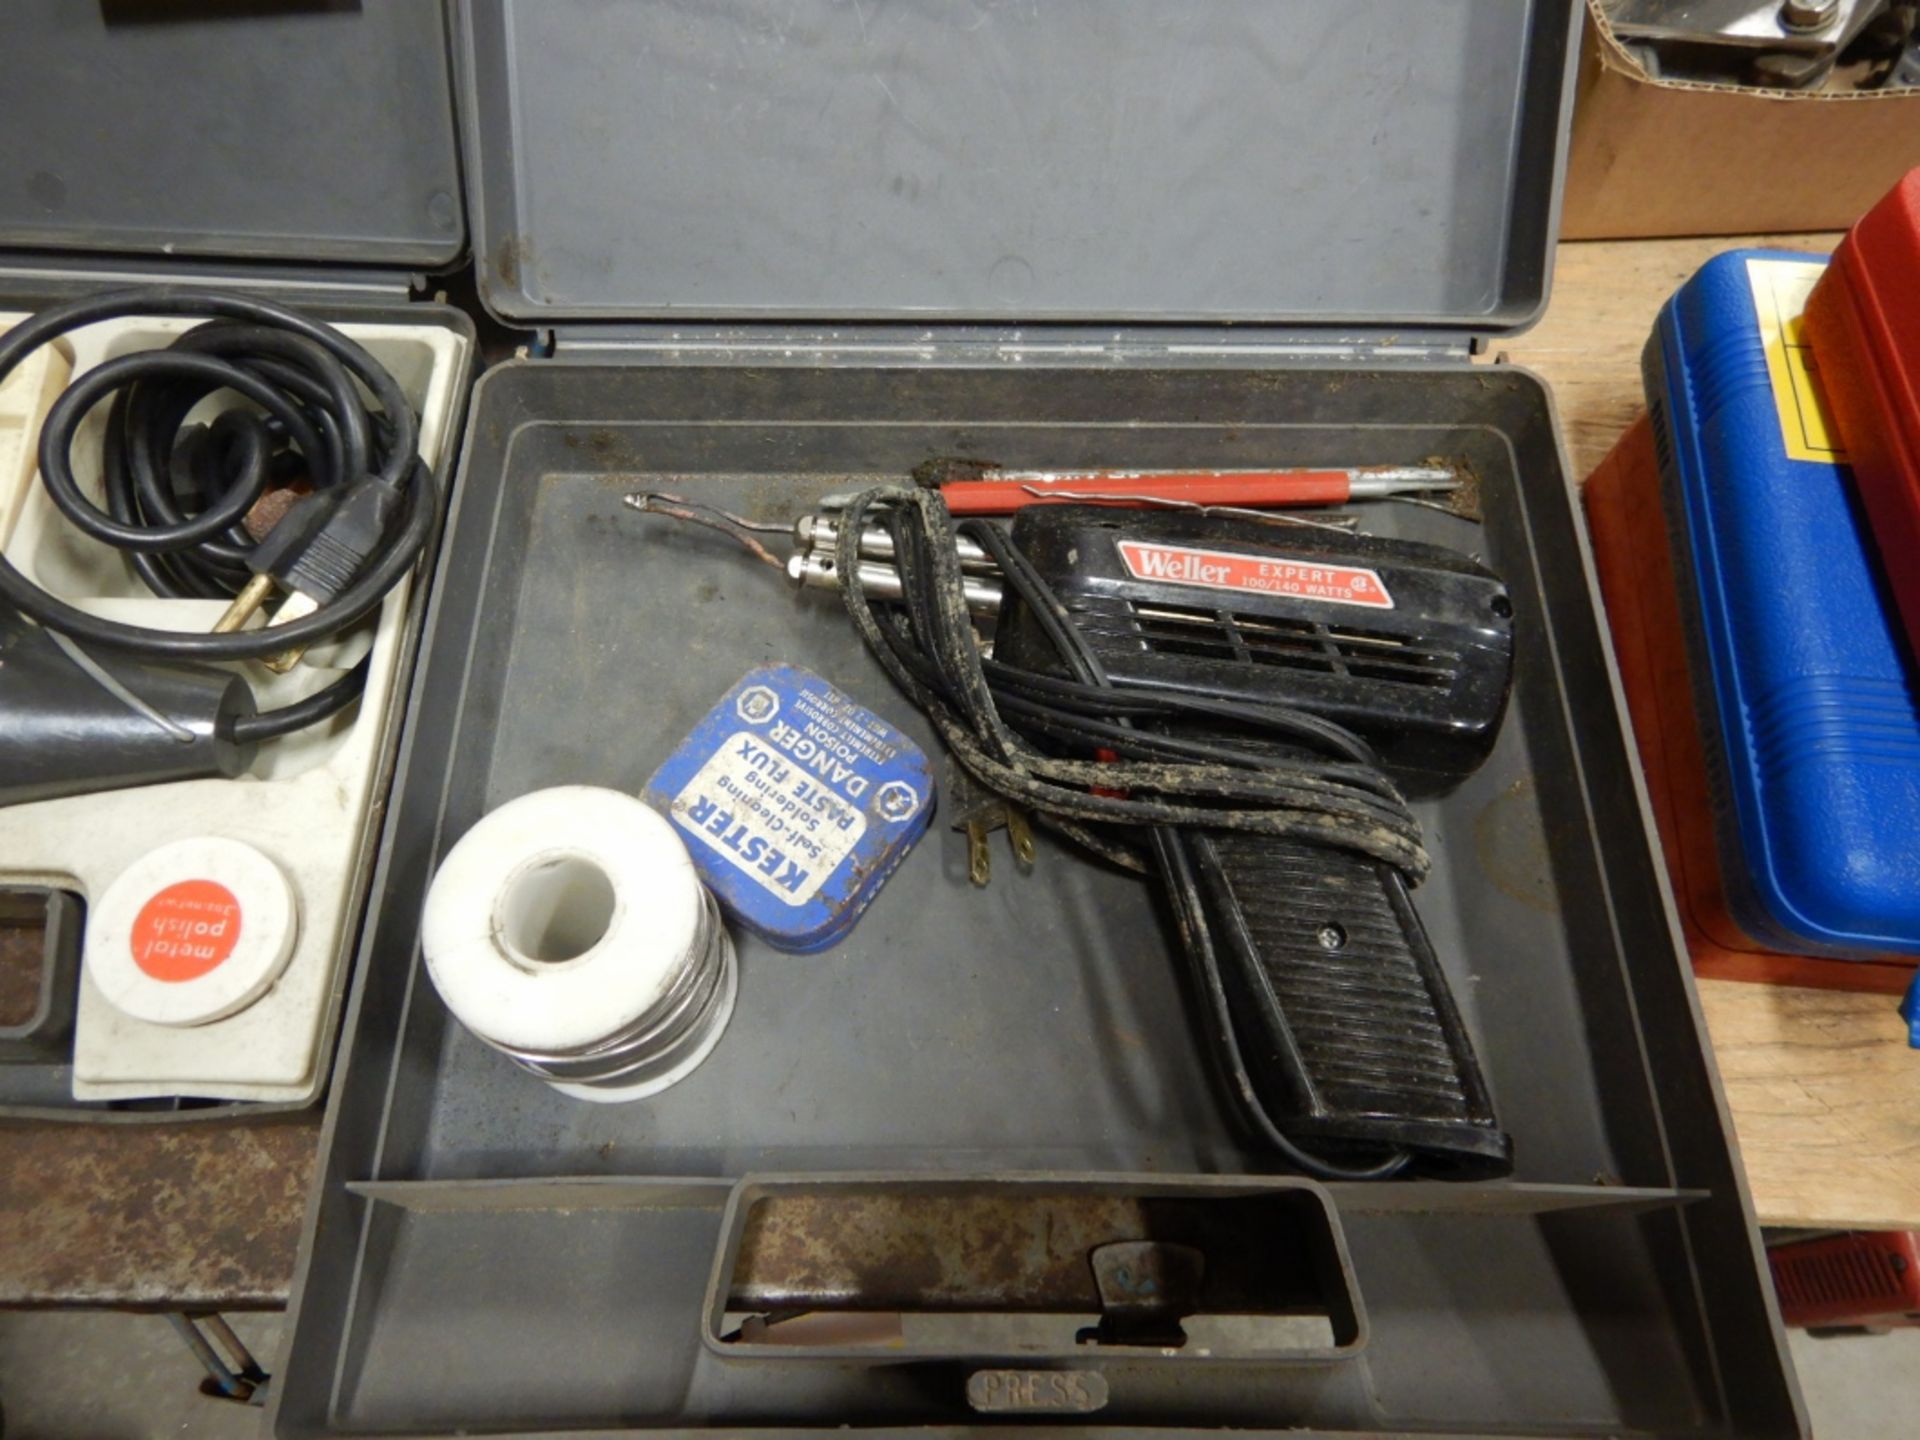 WELLER ROTARY TOOL KIT, WELLER ELECTRIC SOLDIERING GUN, ELECTRO AIRLESS PAINT GUN - Image 4 of 4